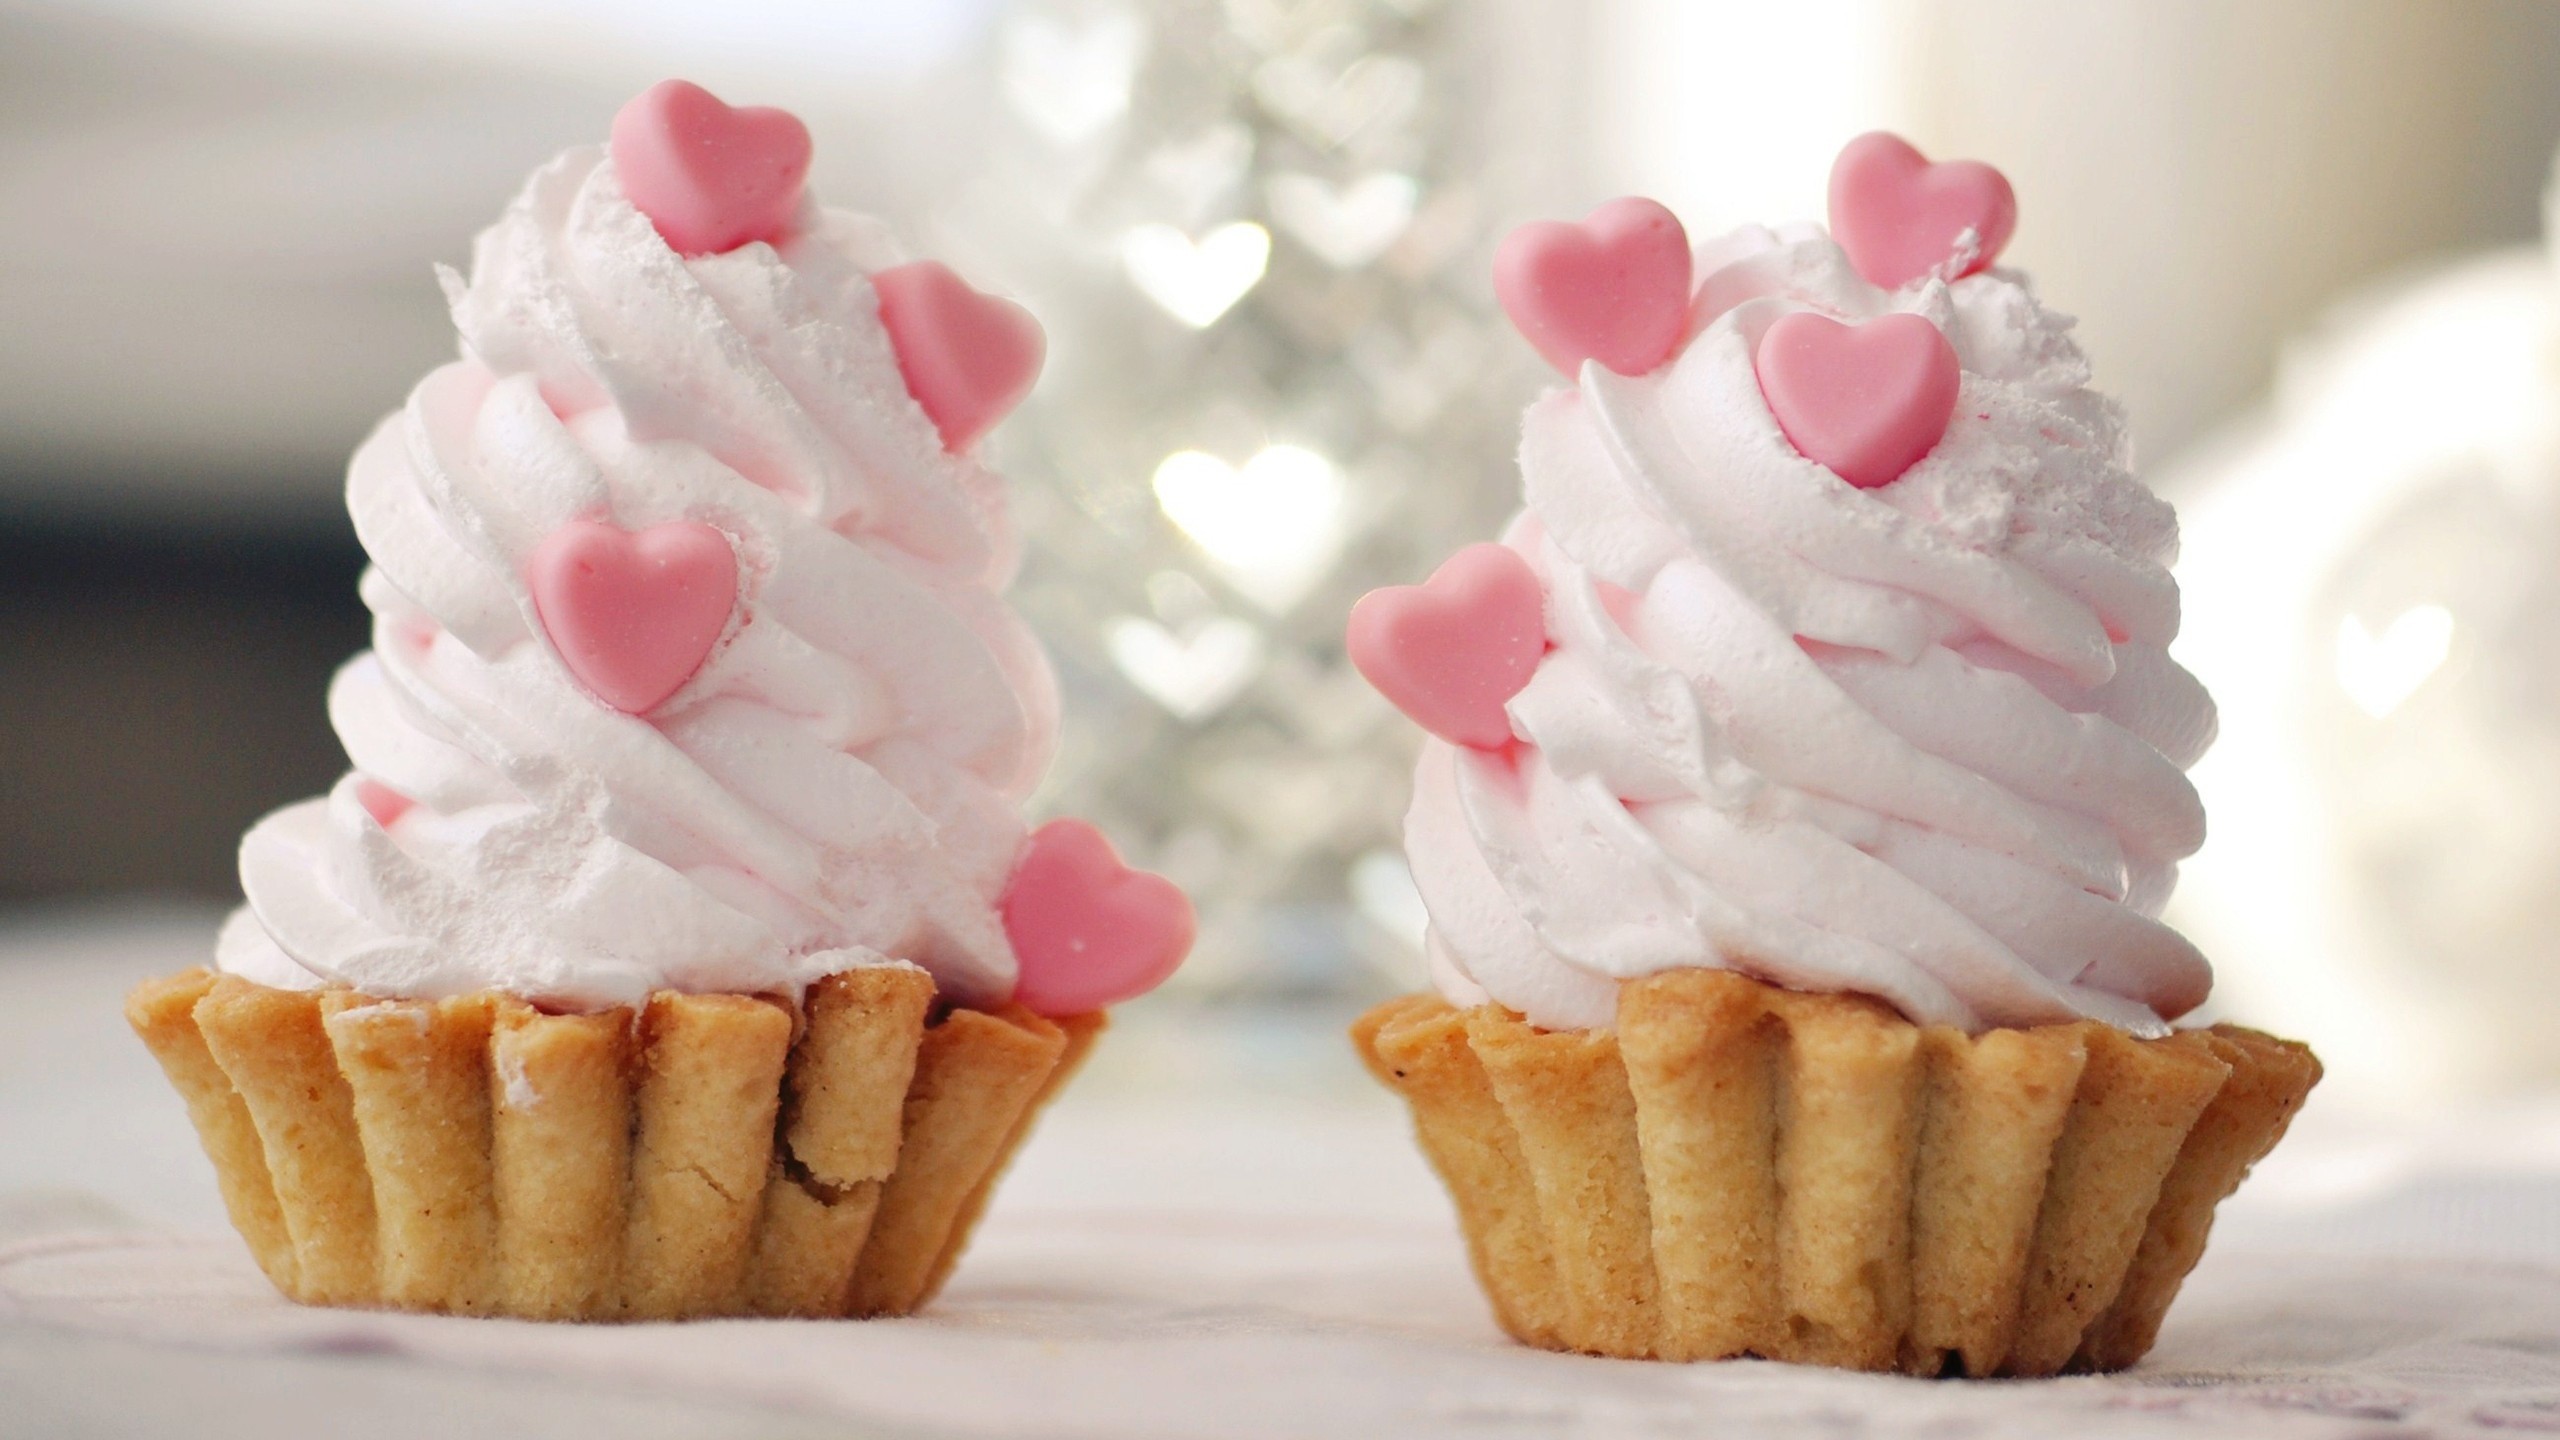 2560x1440 Download Cute Cupcakes Wallpaper 650  px High Resolution .